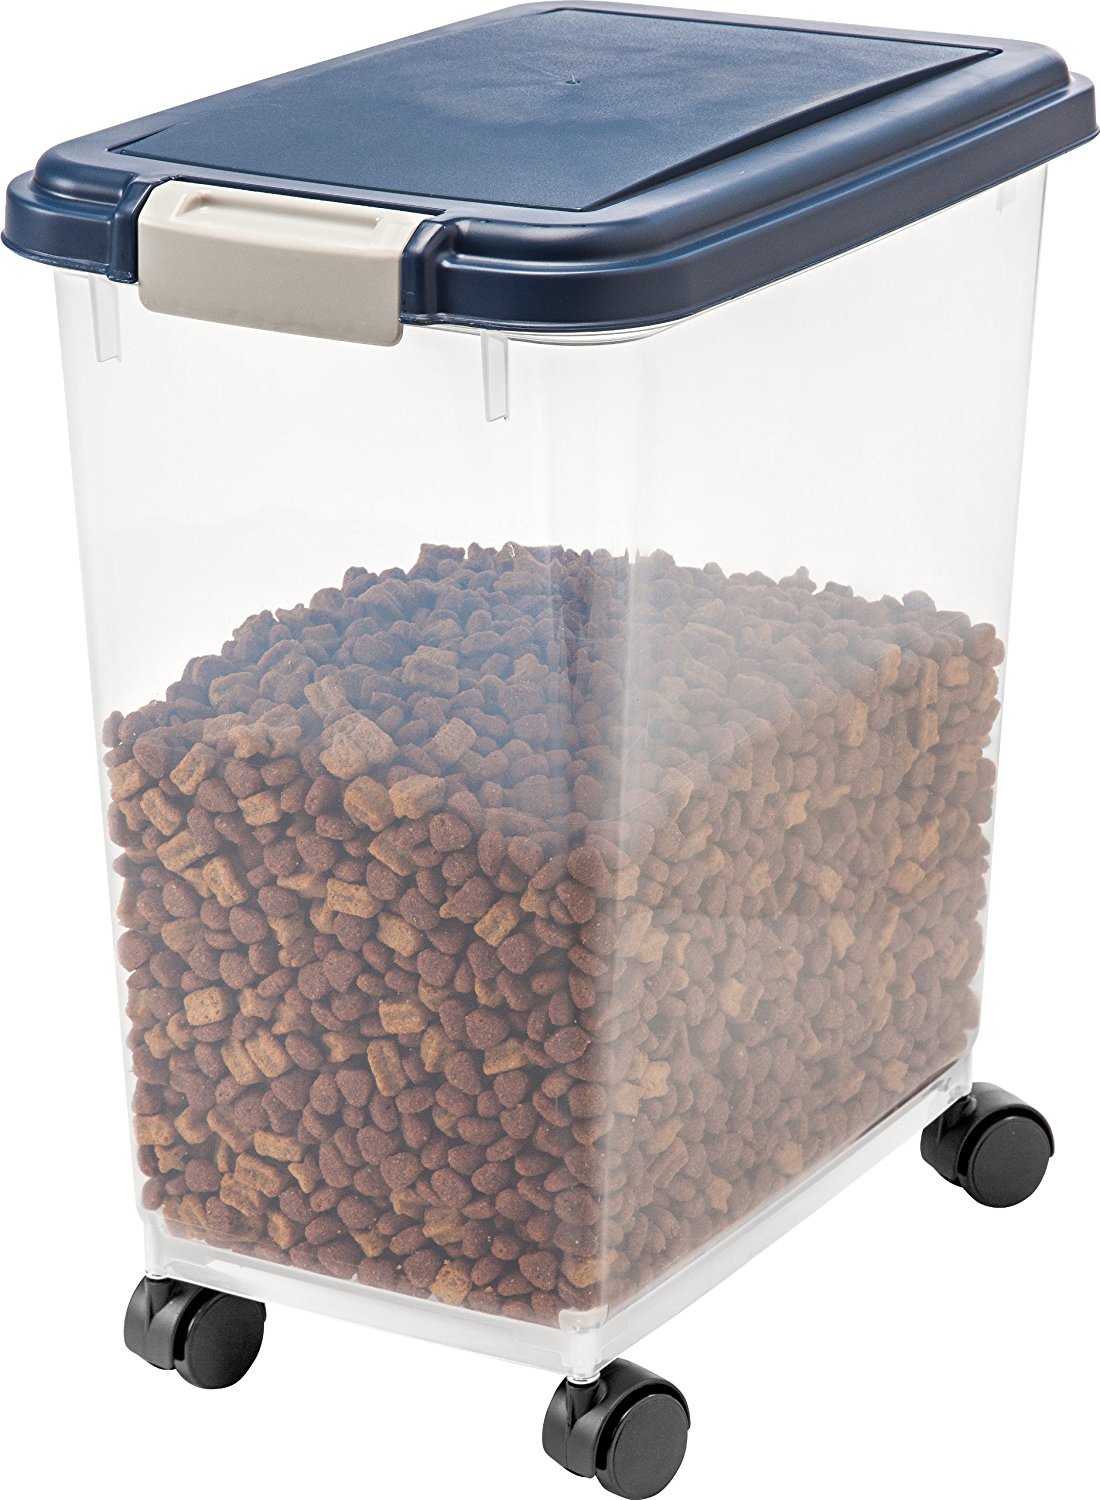 Amazon: BEST SELLING Airtight Pet Food Storage Container Only $10.89!